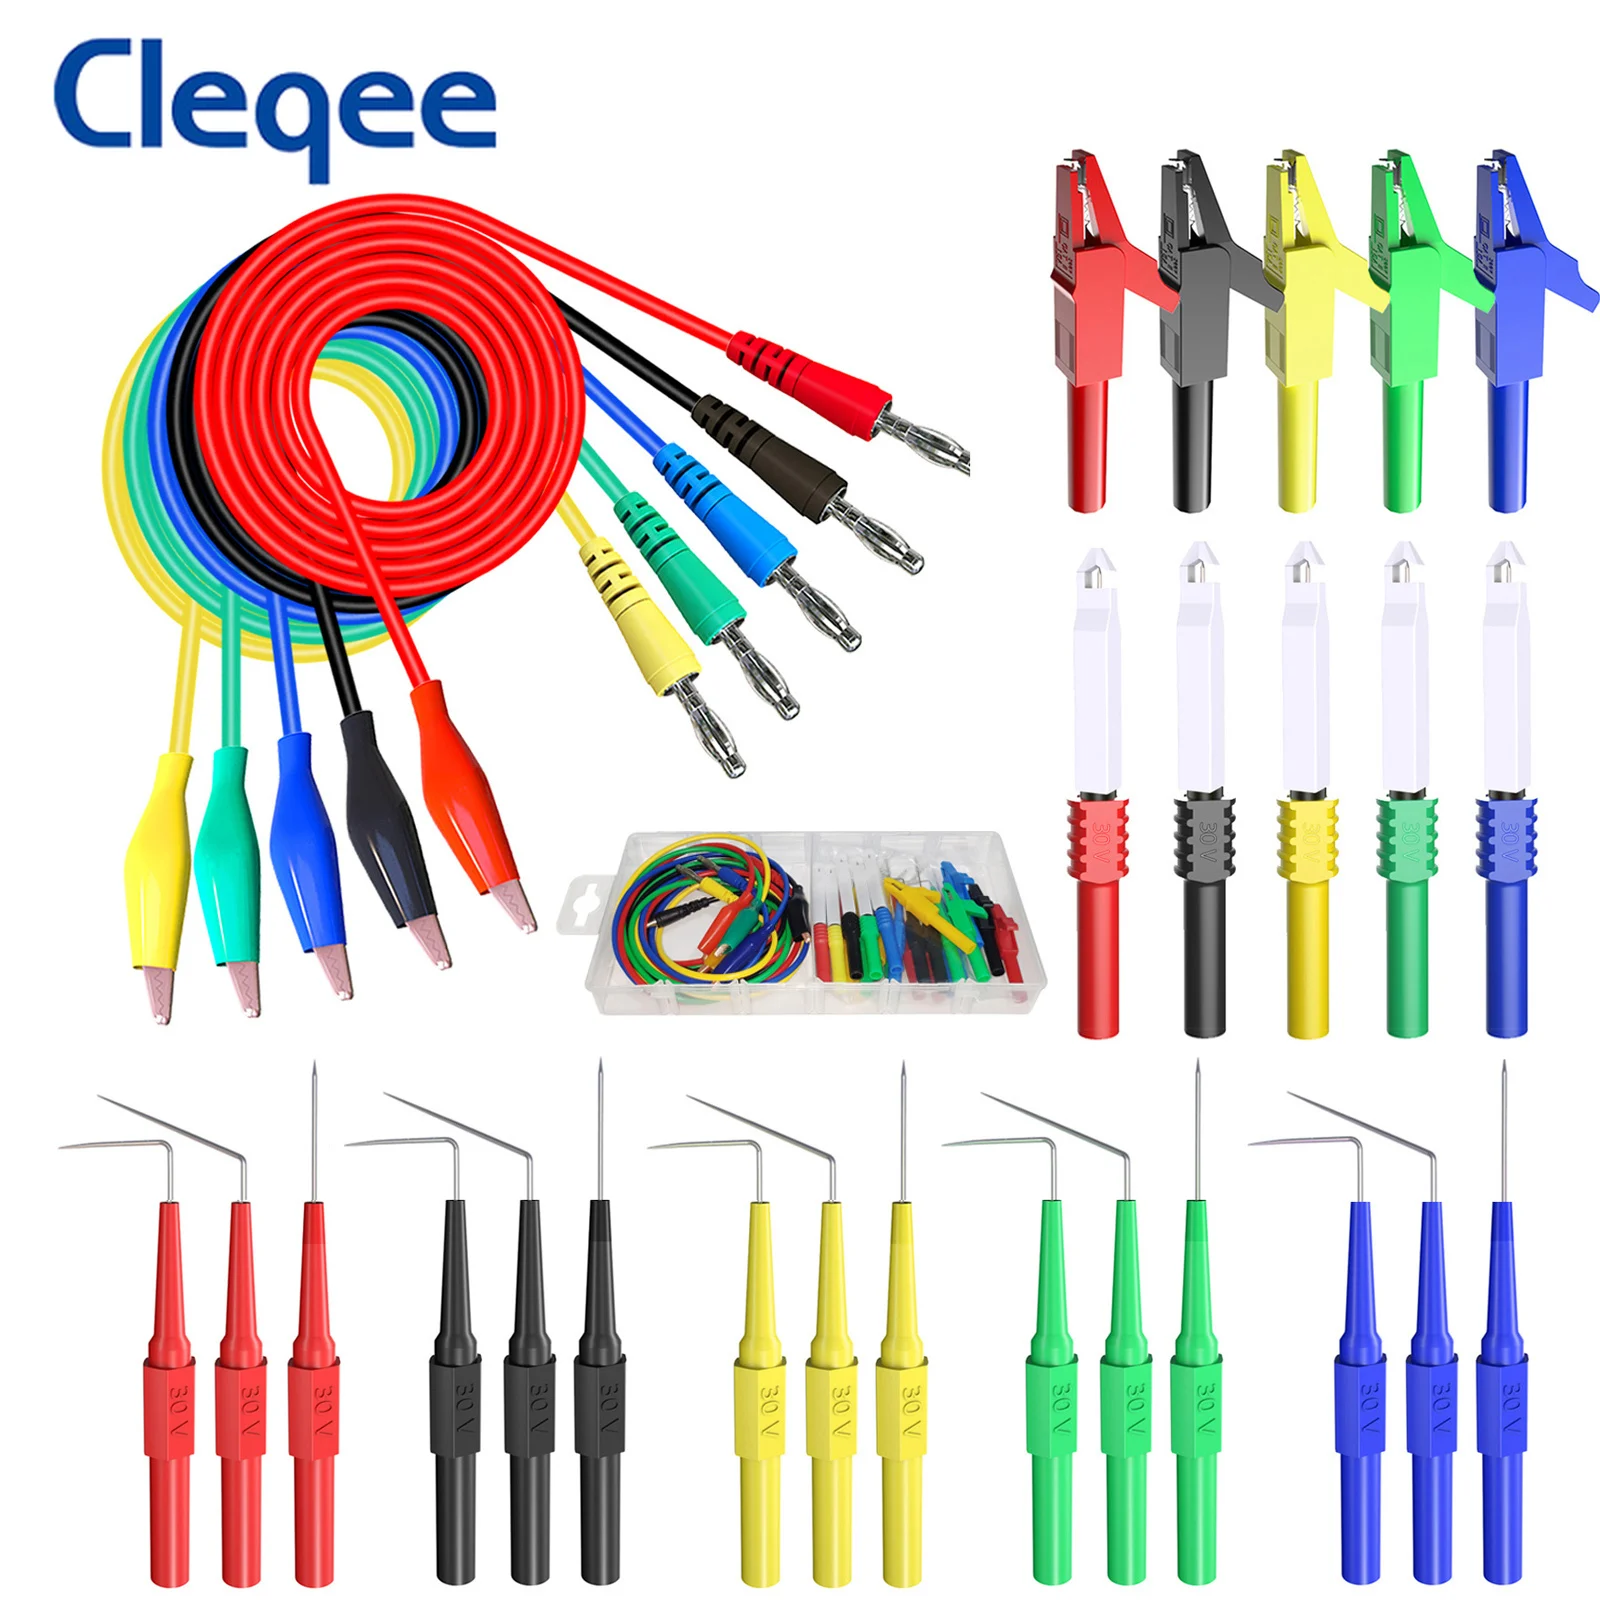 

Cleqee P1920B Back Probe Kit Test Leads 4mm Banana Plug to Alligator Clips Wire Piercing Probe For Multimeter Automotive Tools